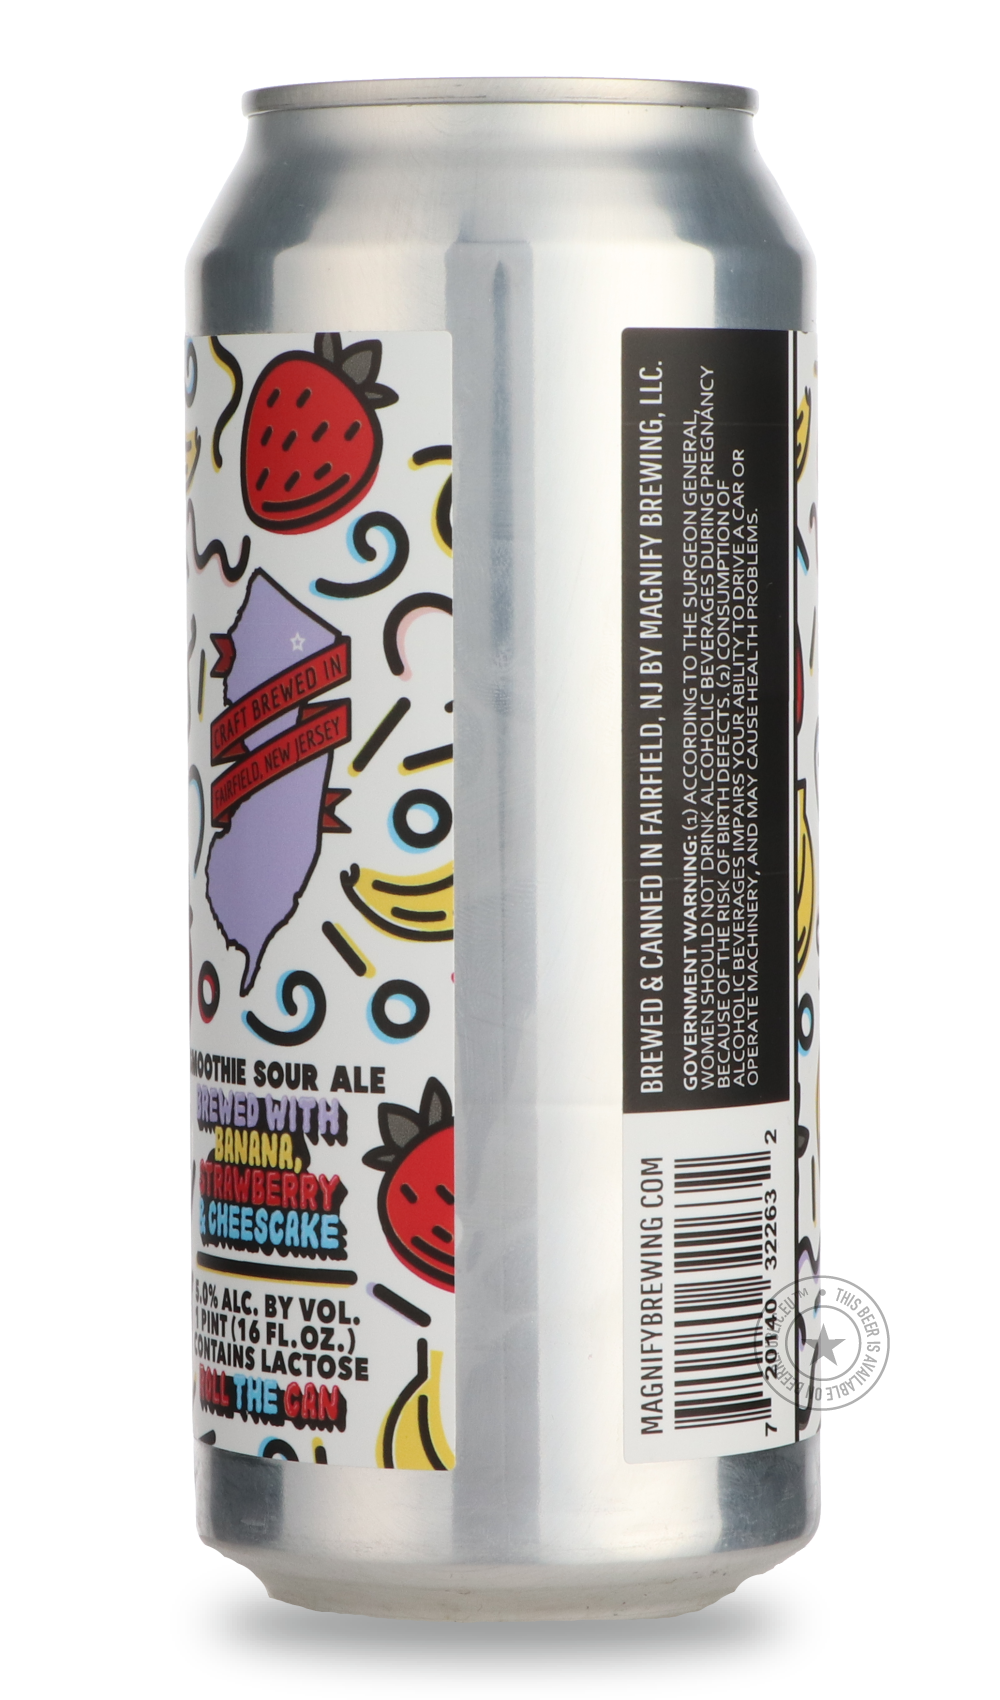 -Magnify- Strawberry Banana Drip-Sour / Wild & Fruity- Only @ Beer Republic - The best online beer store for American & Canadian craft beer - Buy beer online from the USA and Canada - Bier online kopen - Amerikaans bier kopen - Craft beer store - Craft beer kopen - Amerikanisch bier kaufen - Bier online kaufen - Acheter biere online - IPA - Stout - Porter - New England IPA - Hazy IPA - Imperial Stout - Barrel Aged - Barrel Aged Imperial Stout - Brown - Dark beer - Blond - Blonde - Pilsner - Lager - Wheat - 